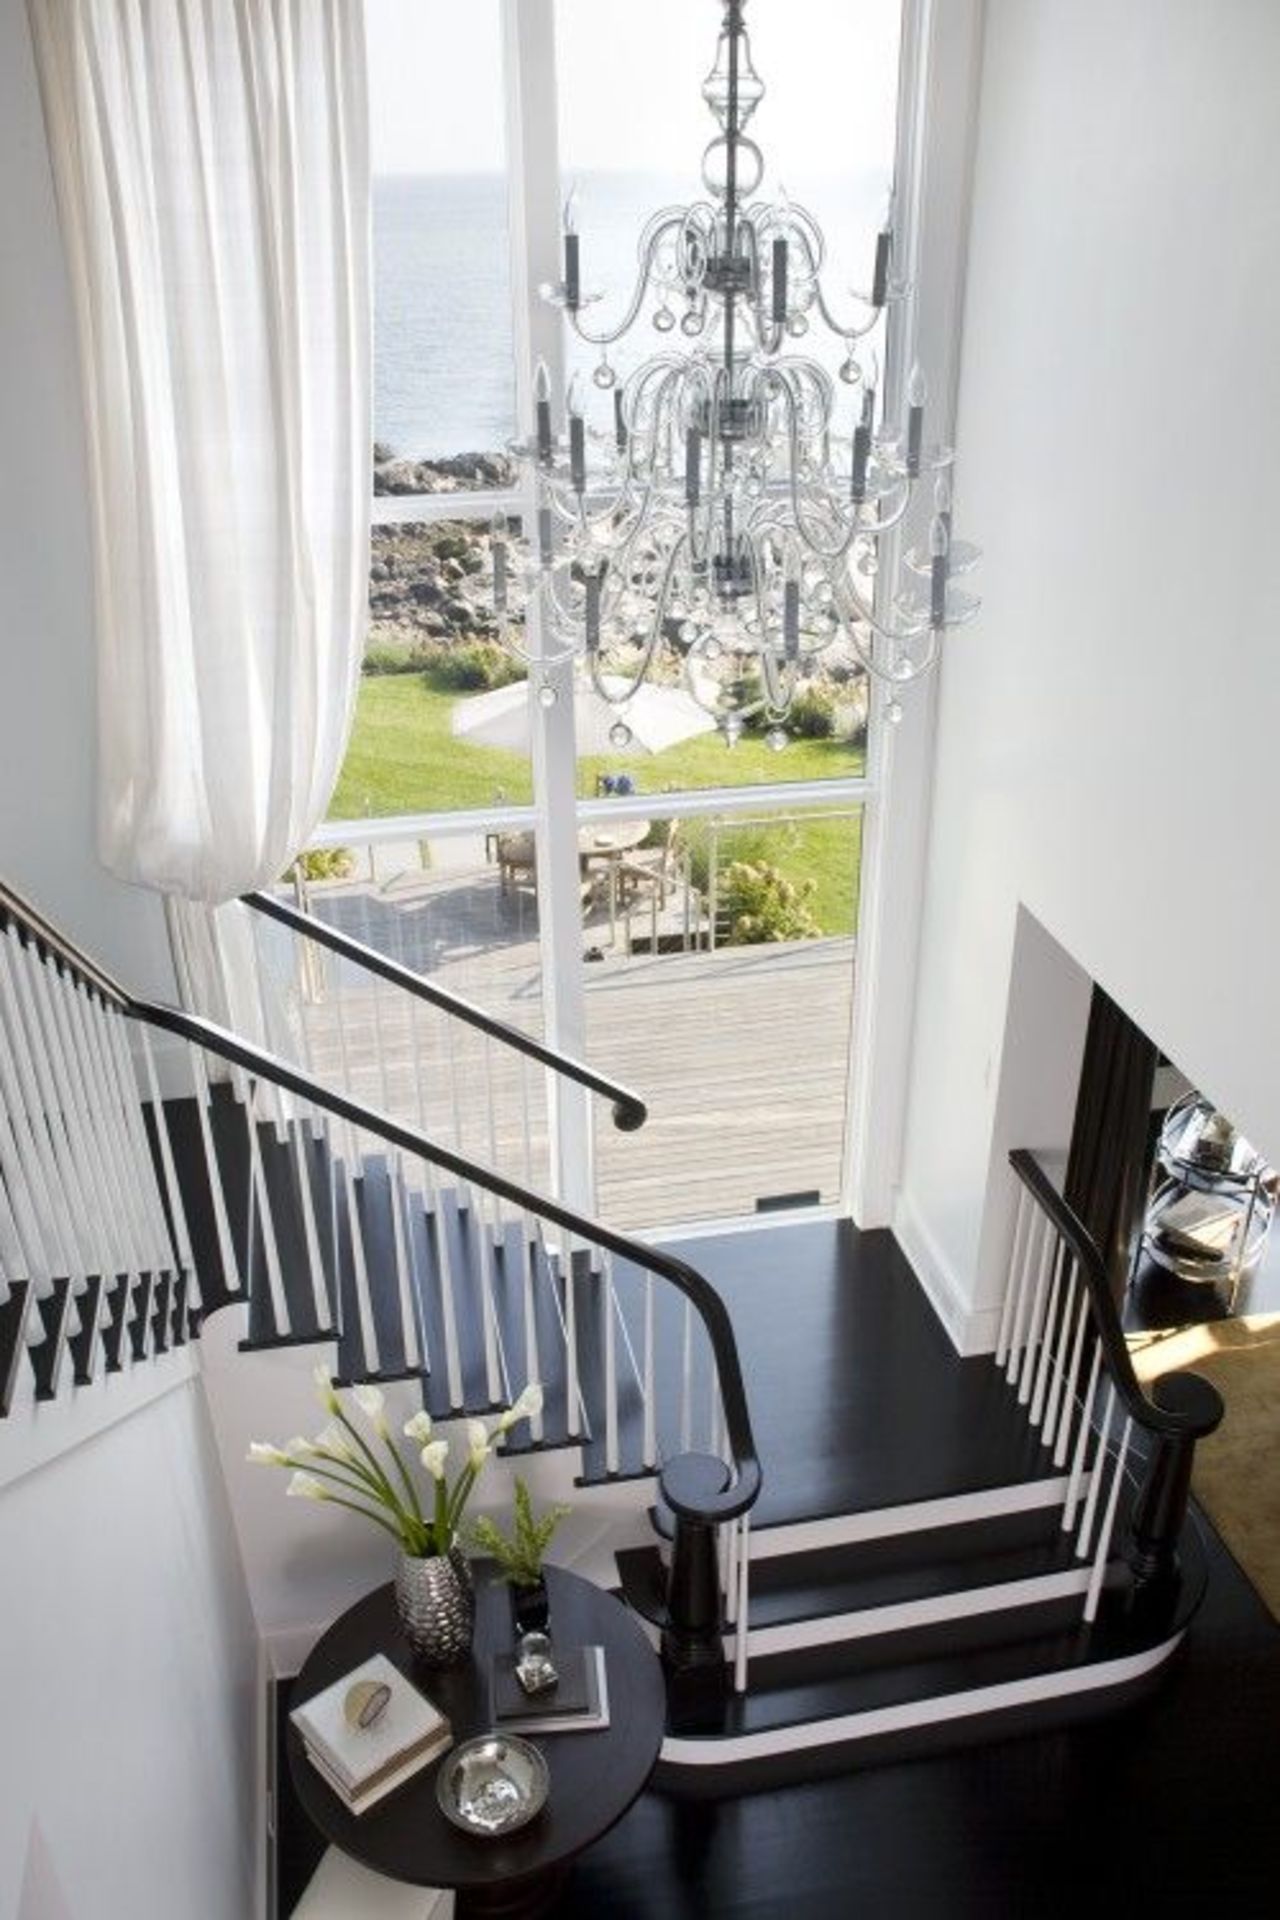 Black&White #Staircase http://www.houzz.com/photos/215243/Rocky-Ledge-Stair-with-View-transitional-staircase-boston https://t.co/wxmesh4J4V